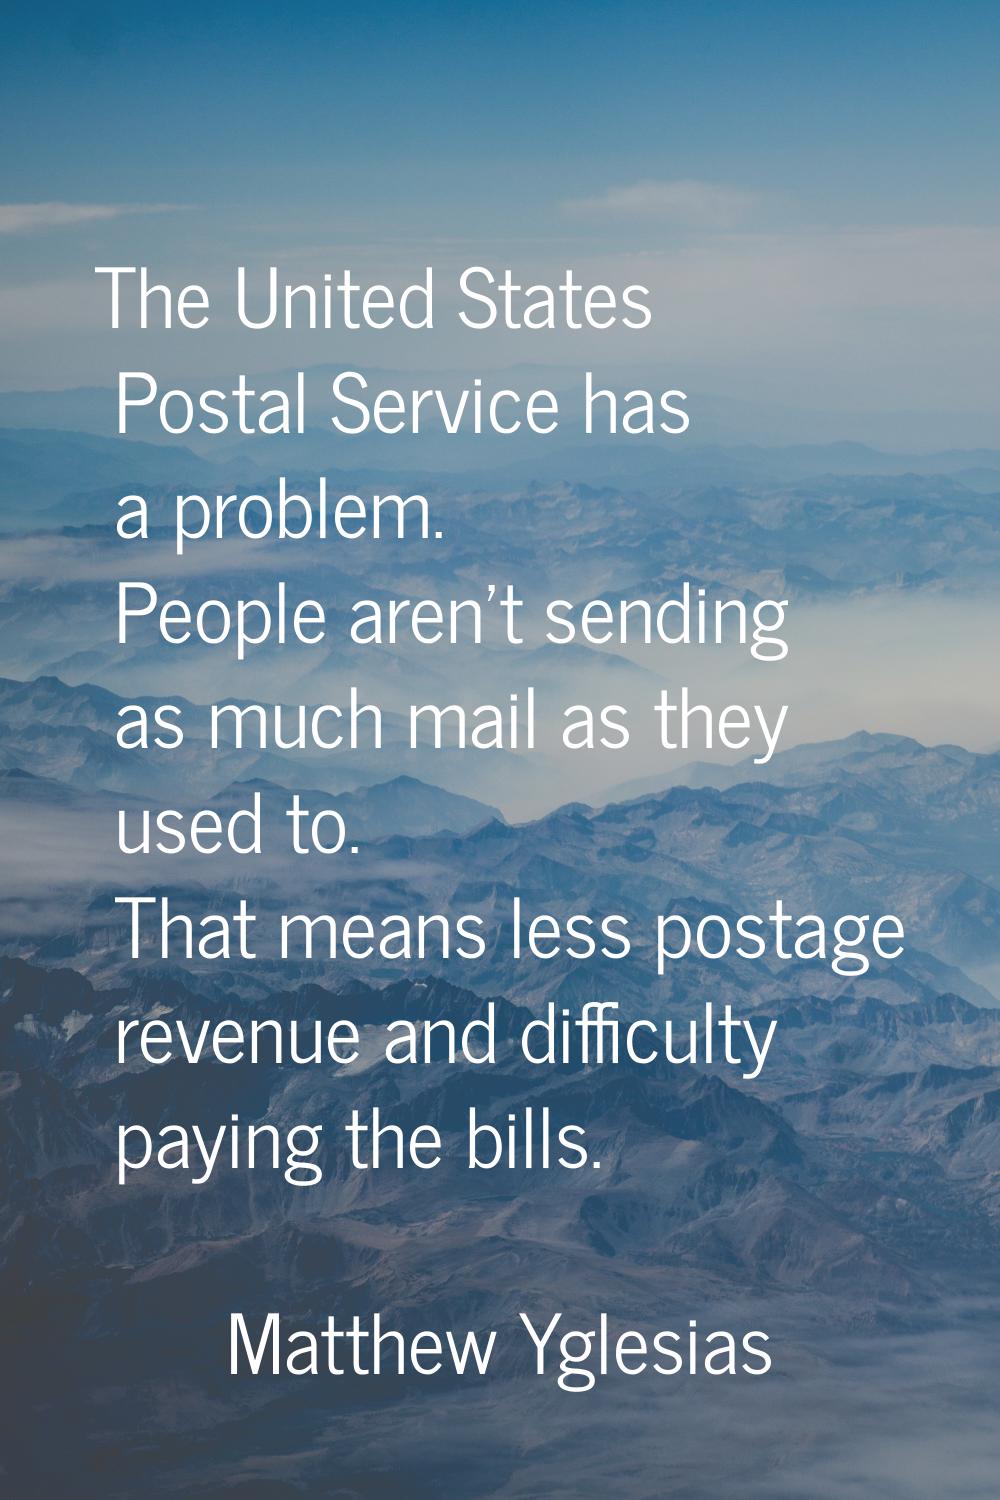 The United States Postal Service has a problem. People aren't sending as much mail as they used to.